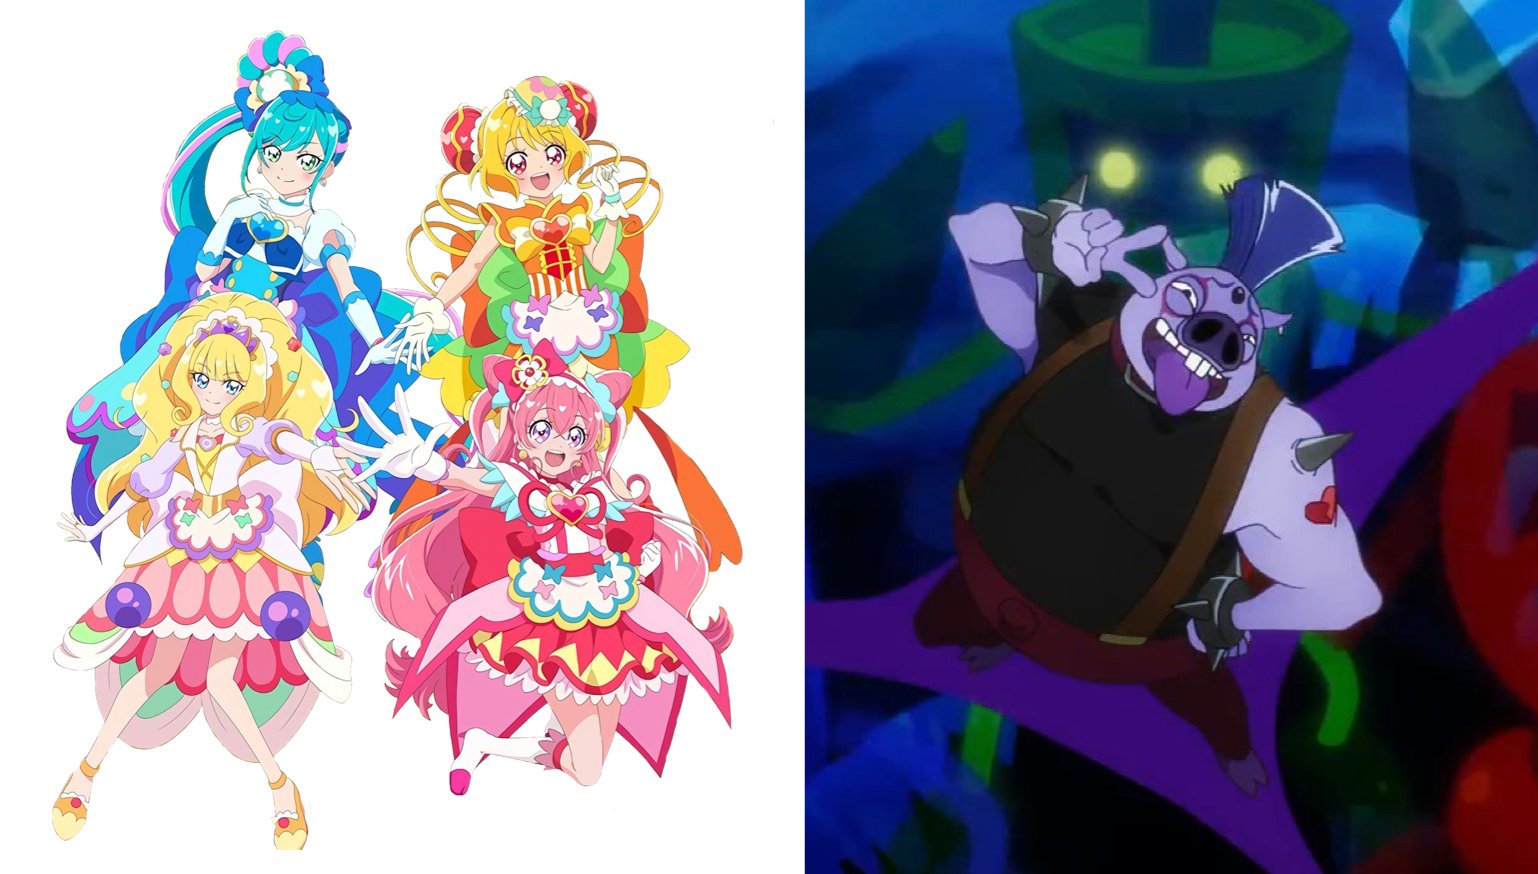 Cure Meme Riceposting on X: Did you know? The F in Precure All